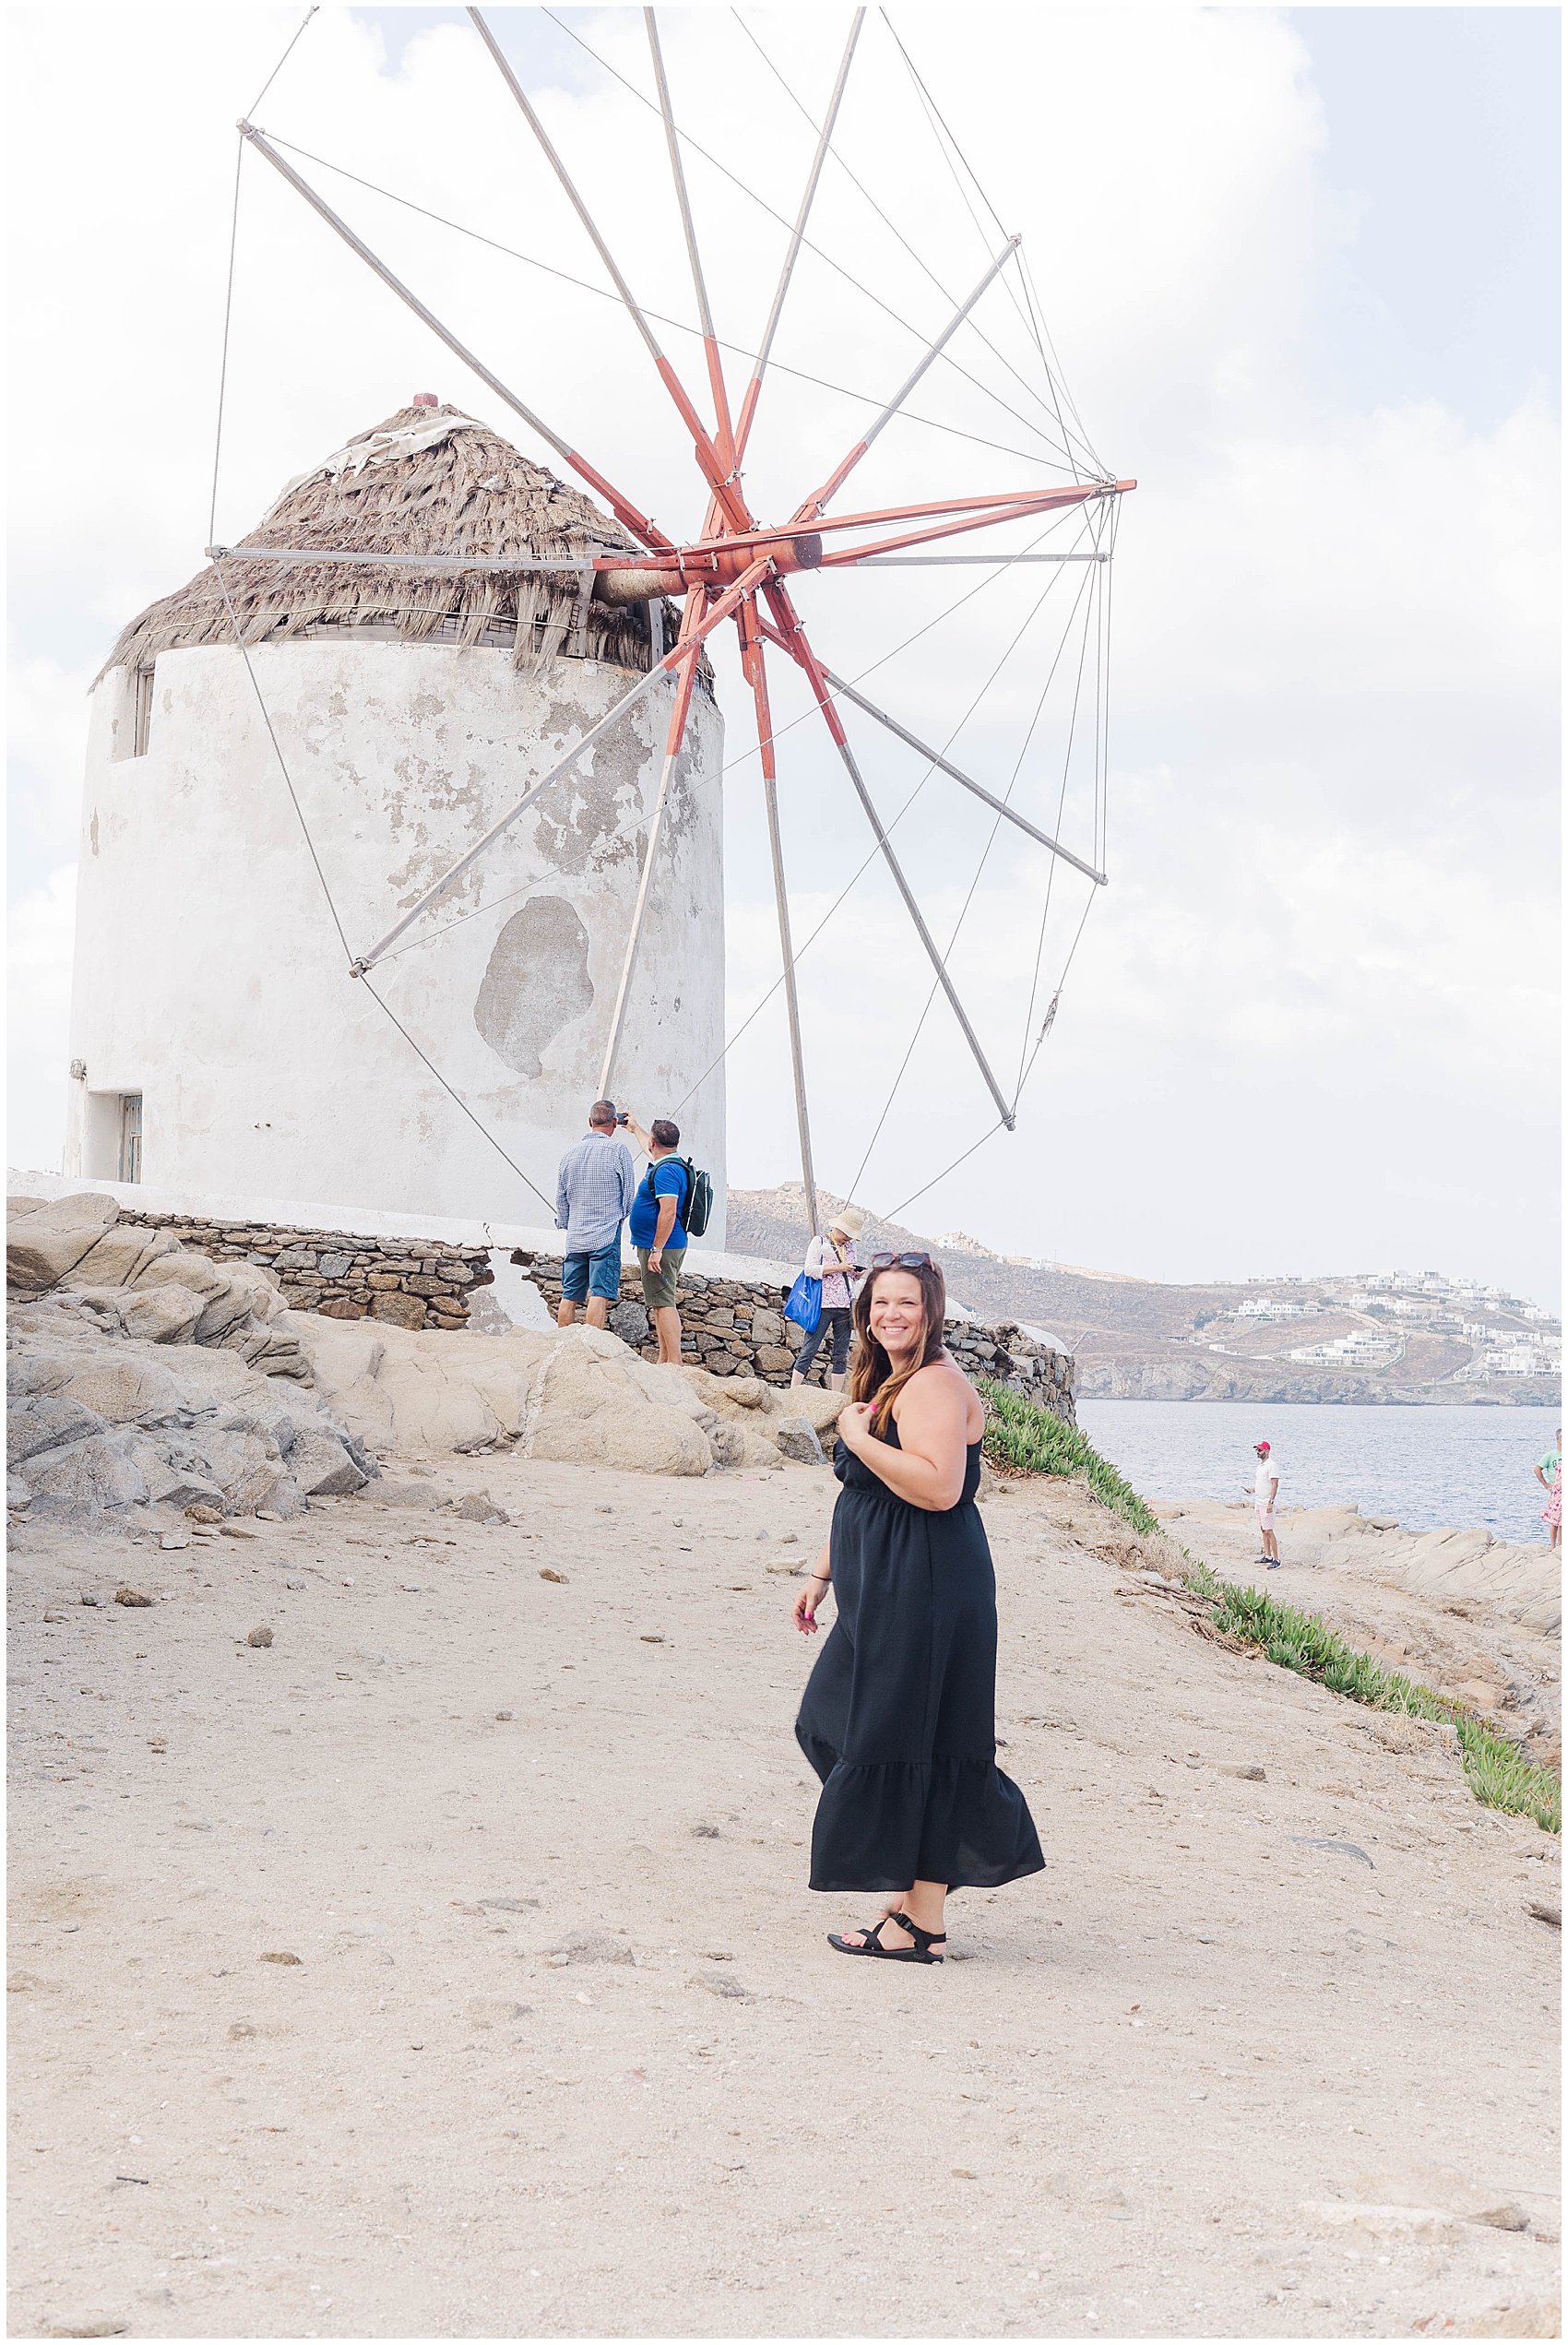 nicole standing in front of a windmill greece photoshoot